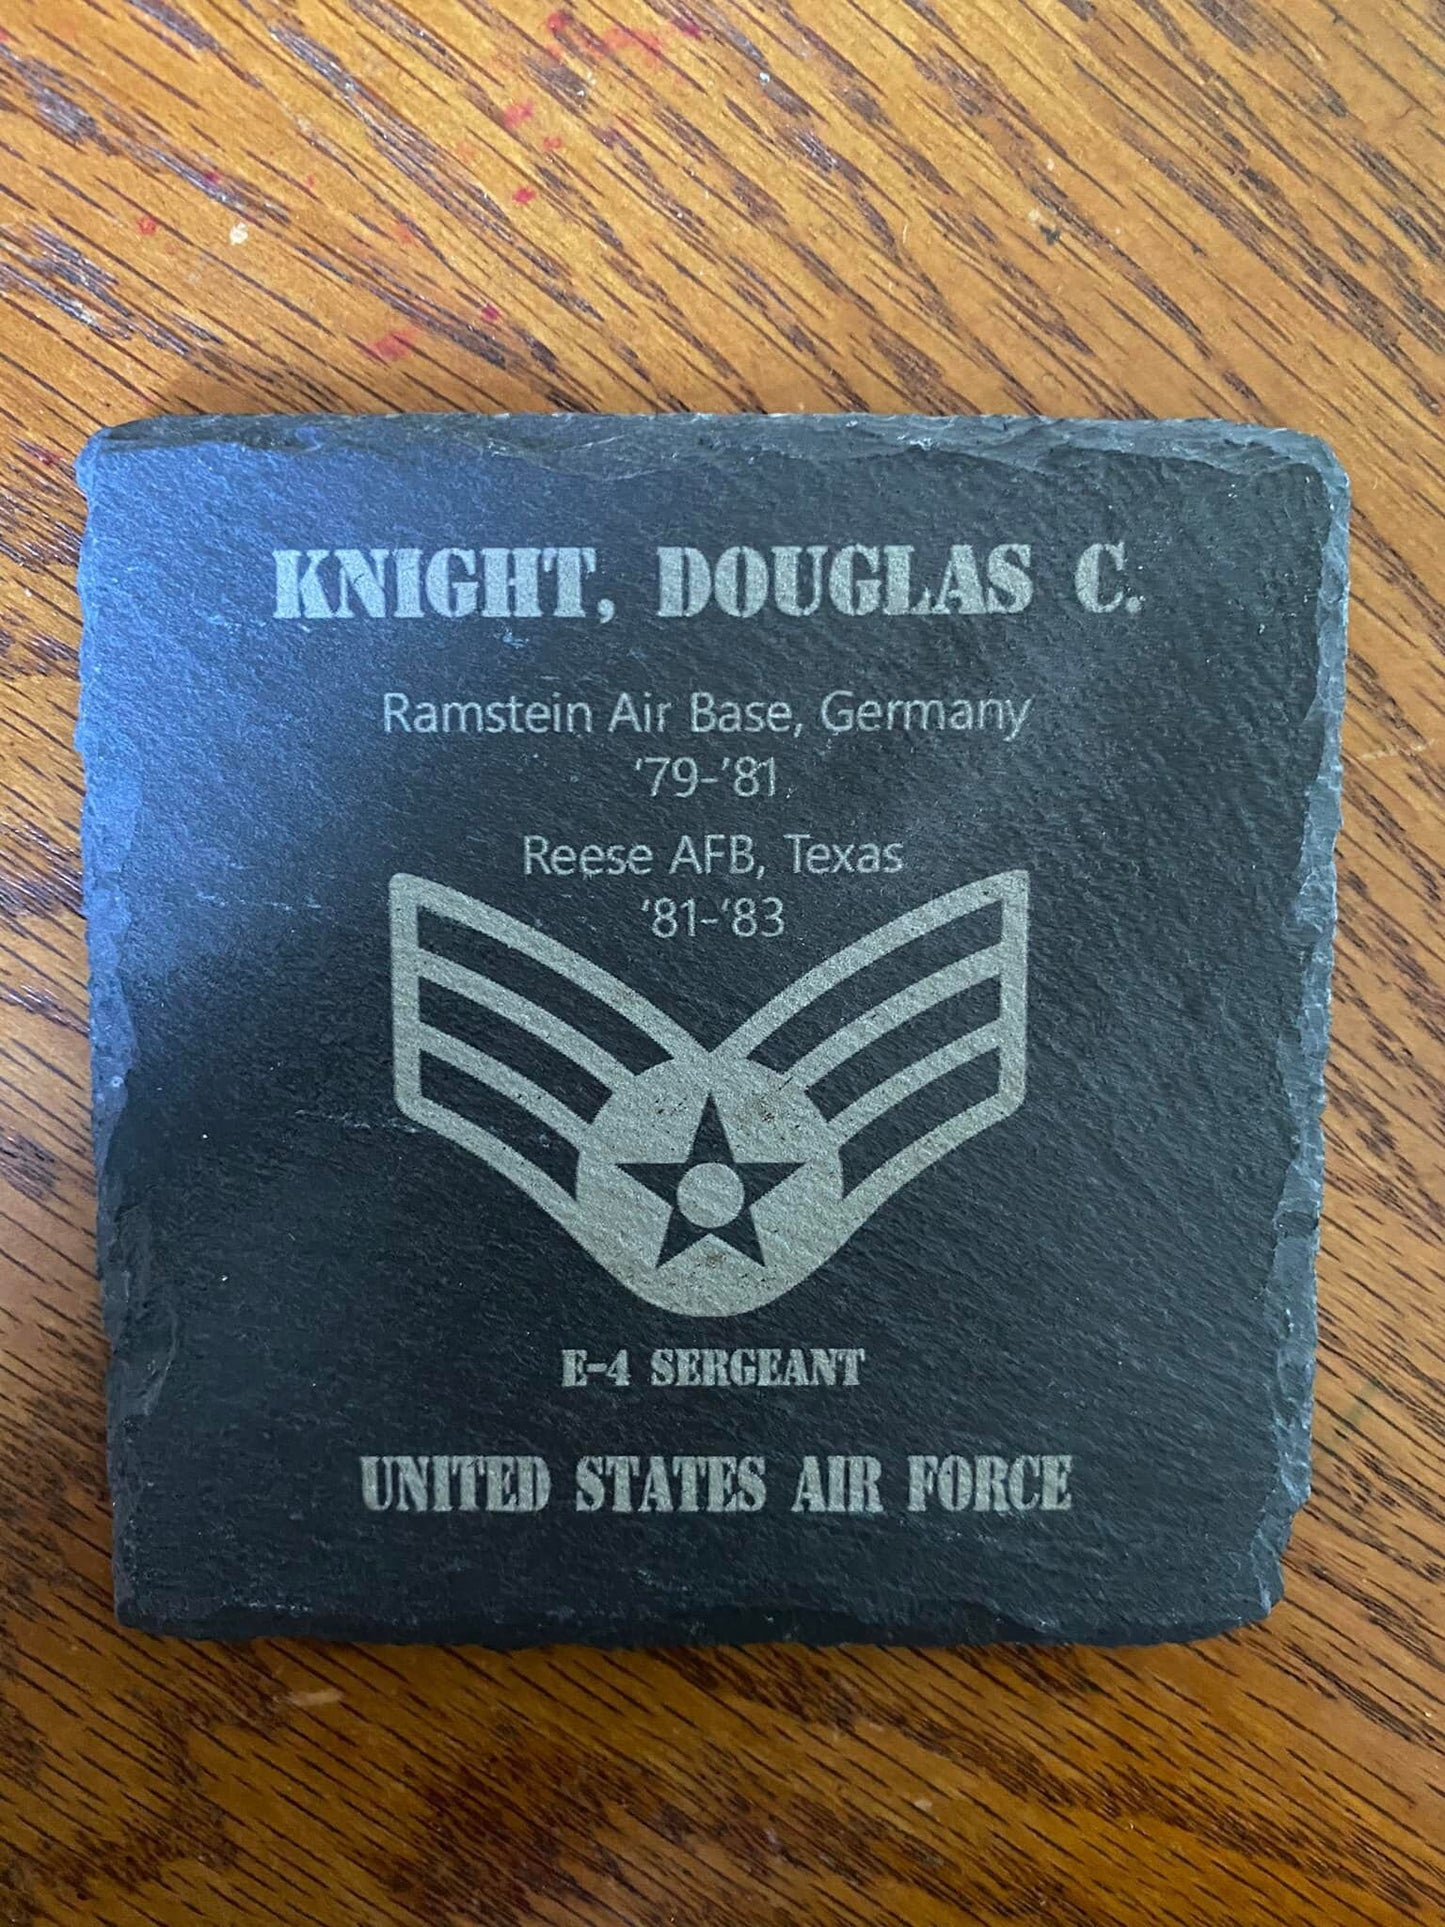 Laser Engraved Coaster Personalized with Name, Rank, and Duty Station